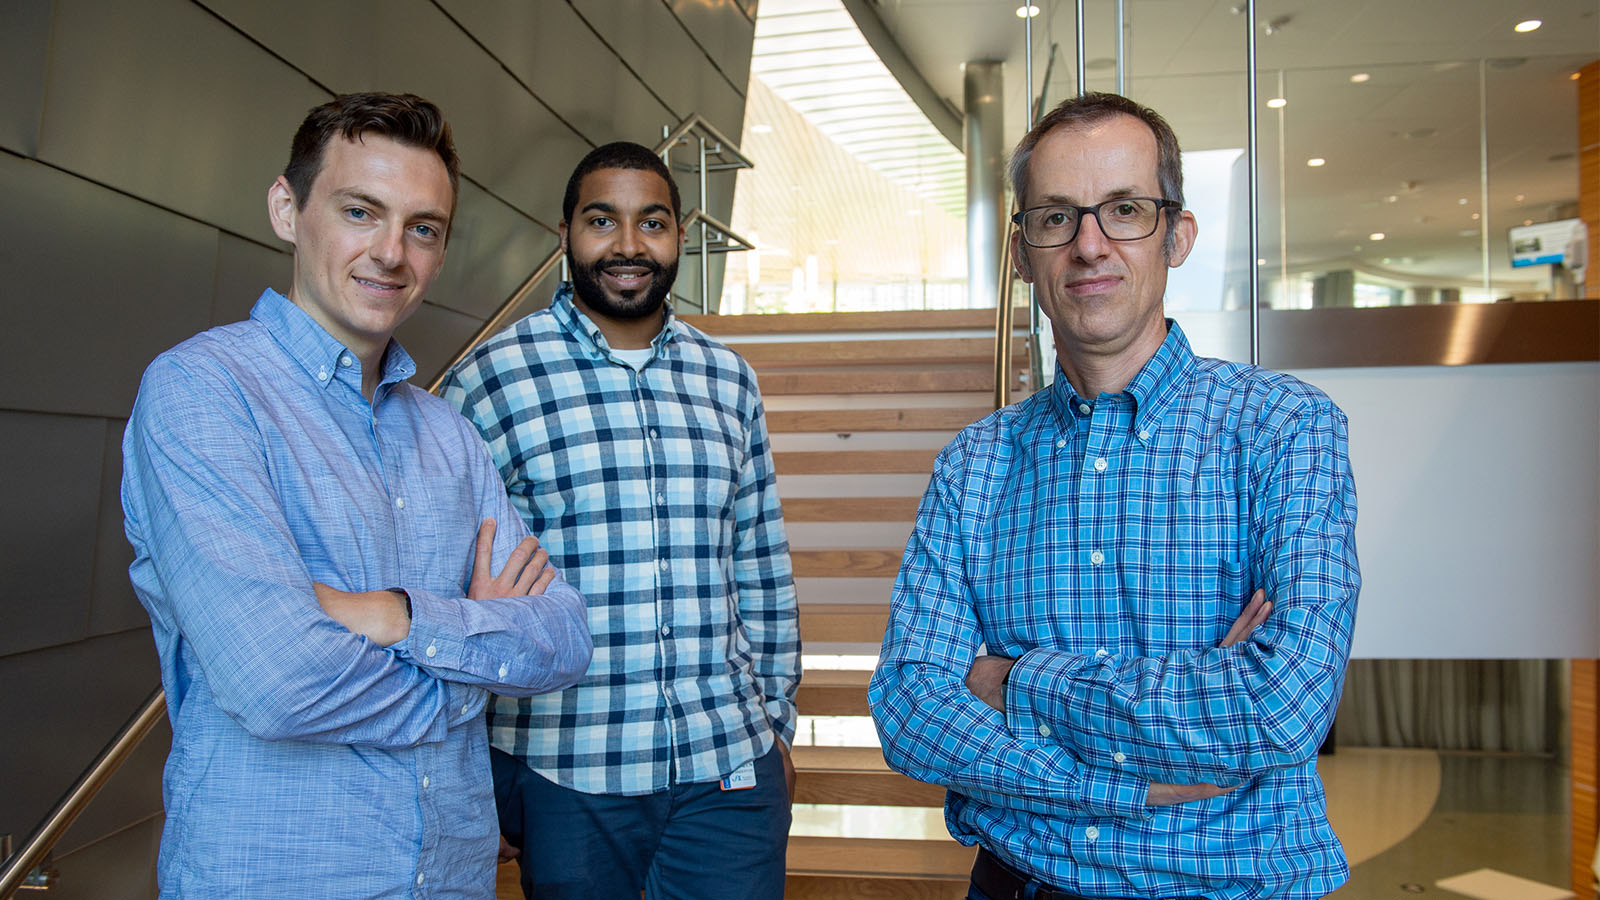 An image of a research team comprised of three people: Kevin Johnson, Kevin Anderson, and Roel Verhaak